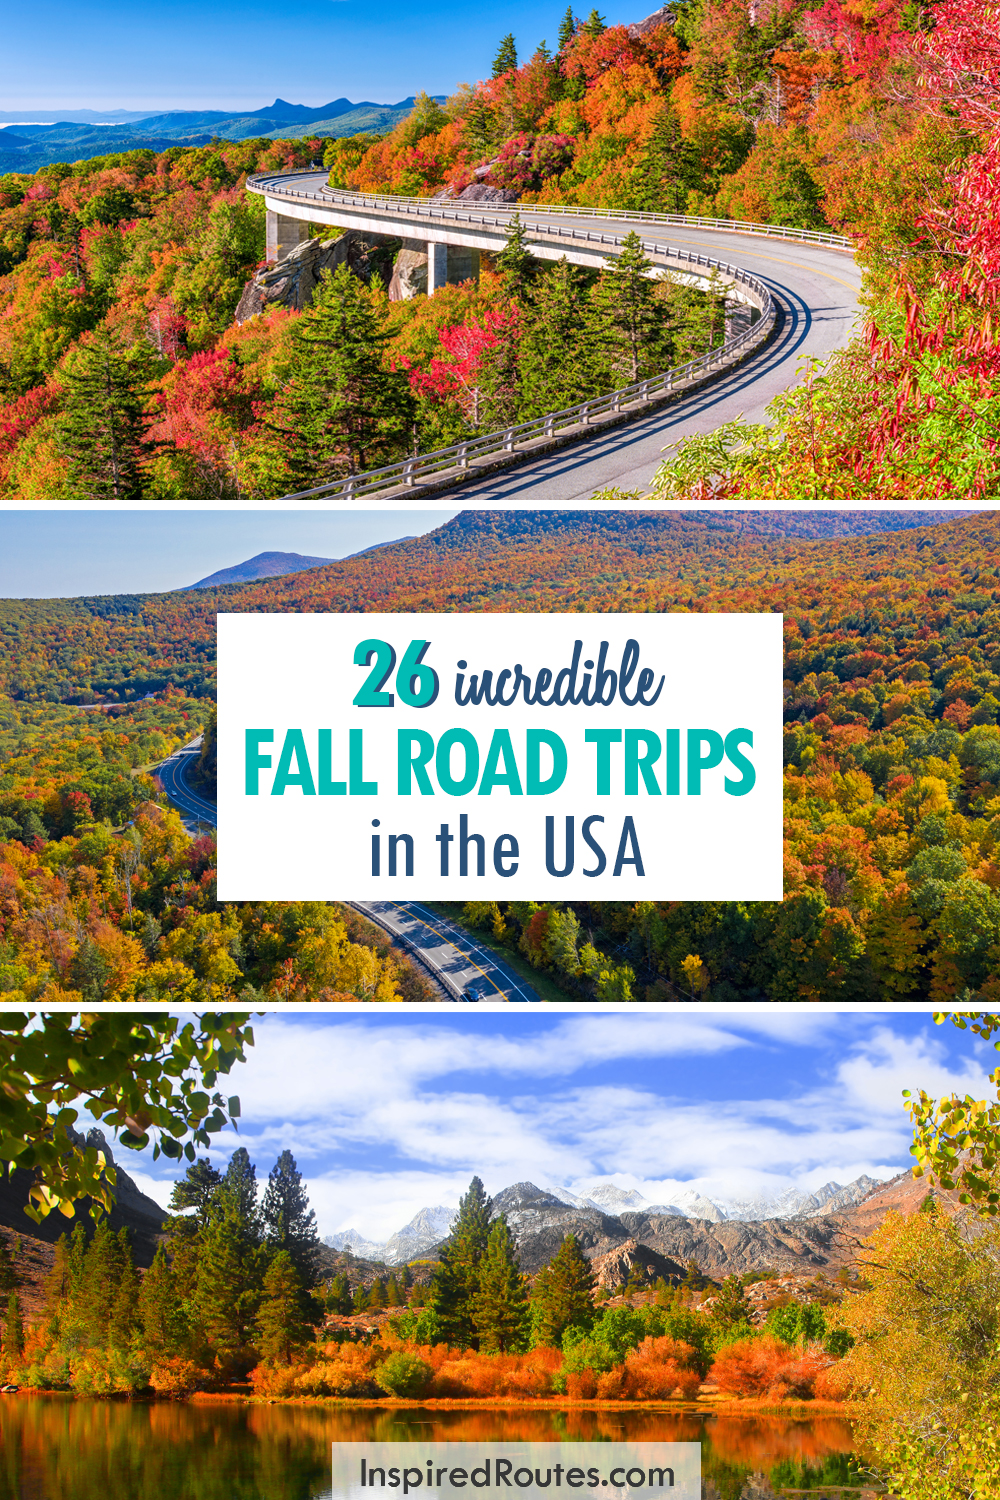 26 incredible fall road trips in the usa with photos of roads going through brightly colored fall foliage